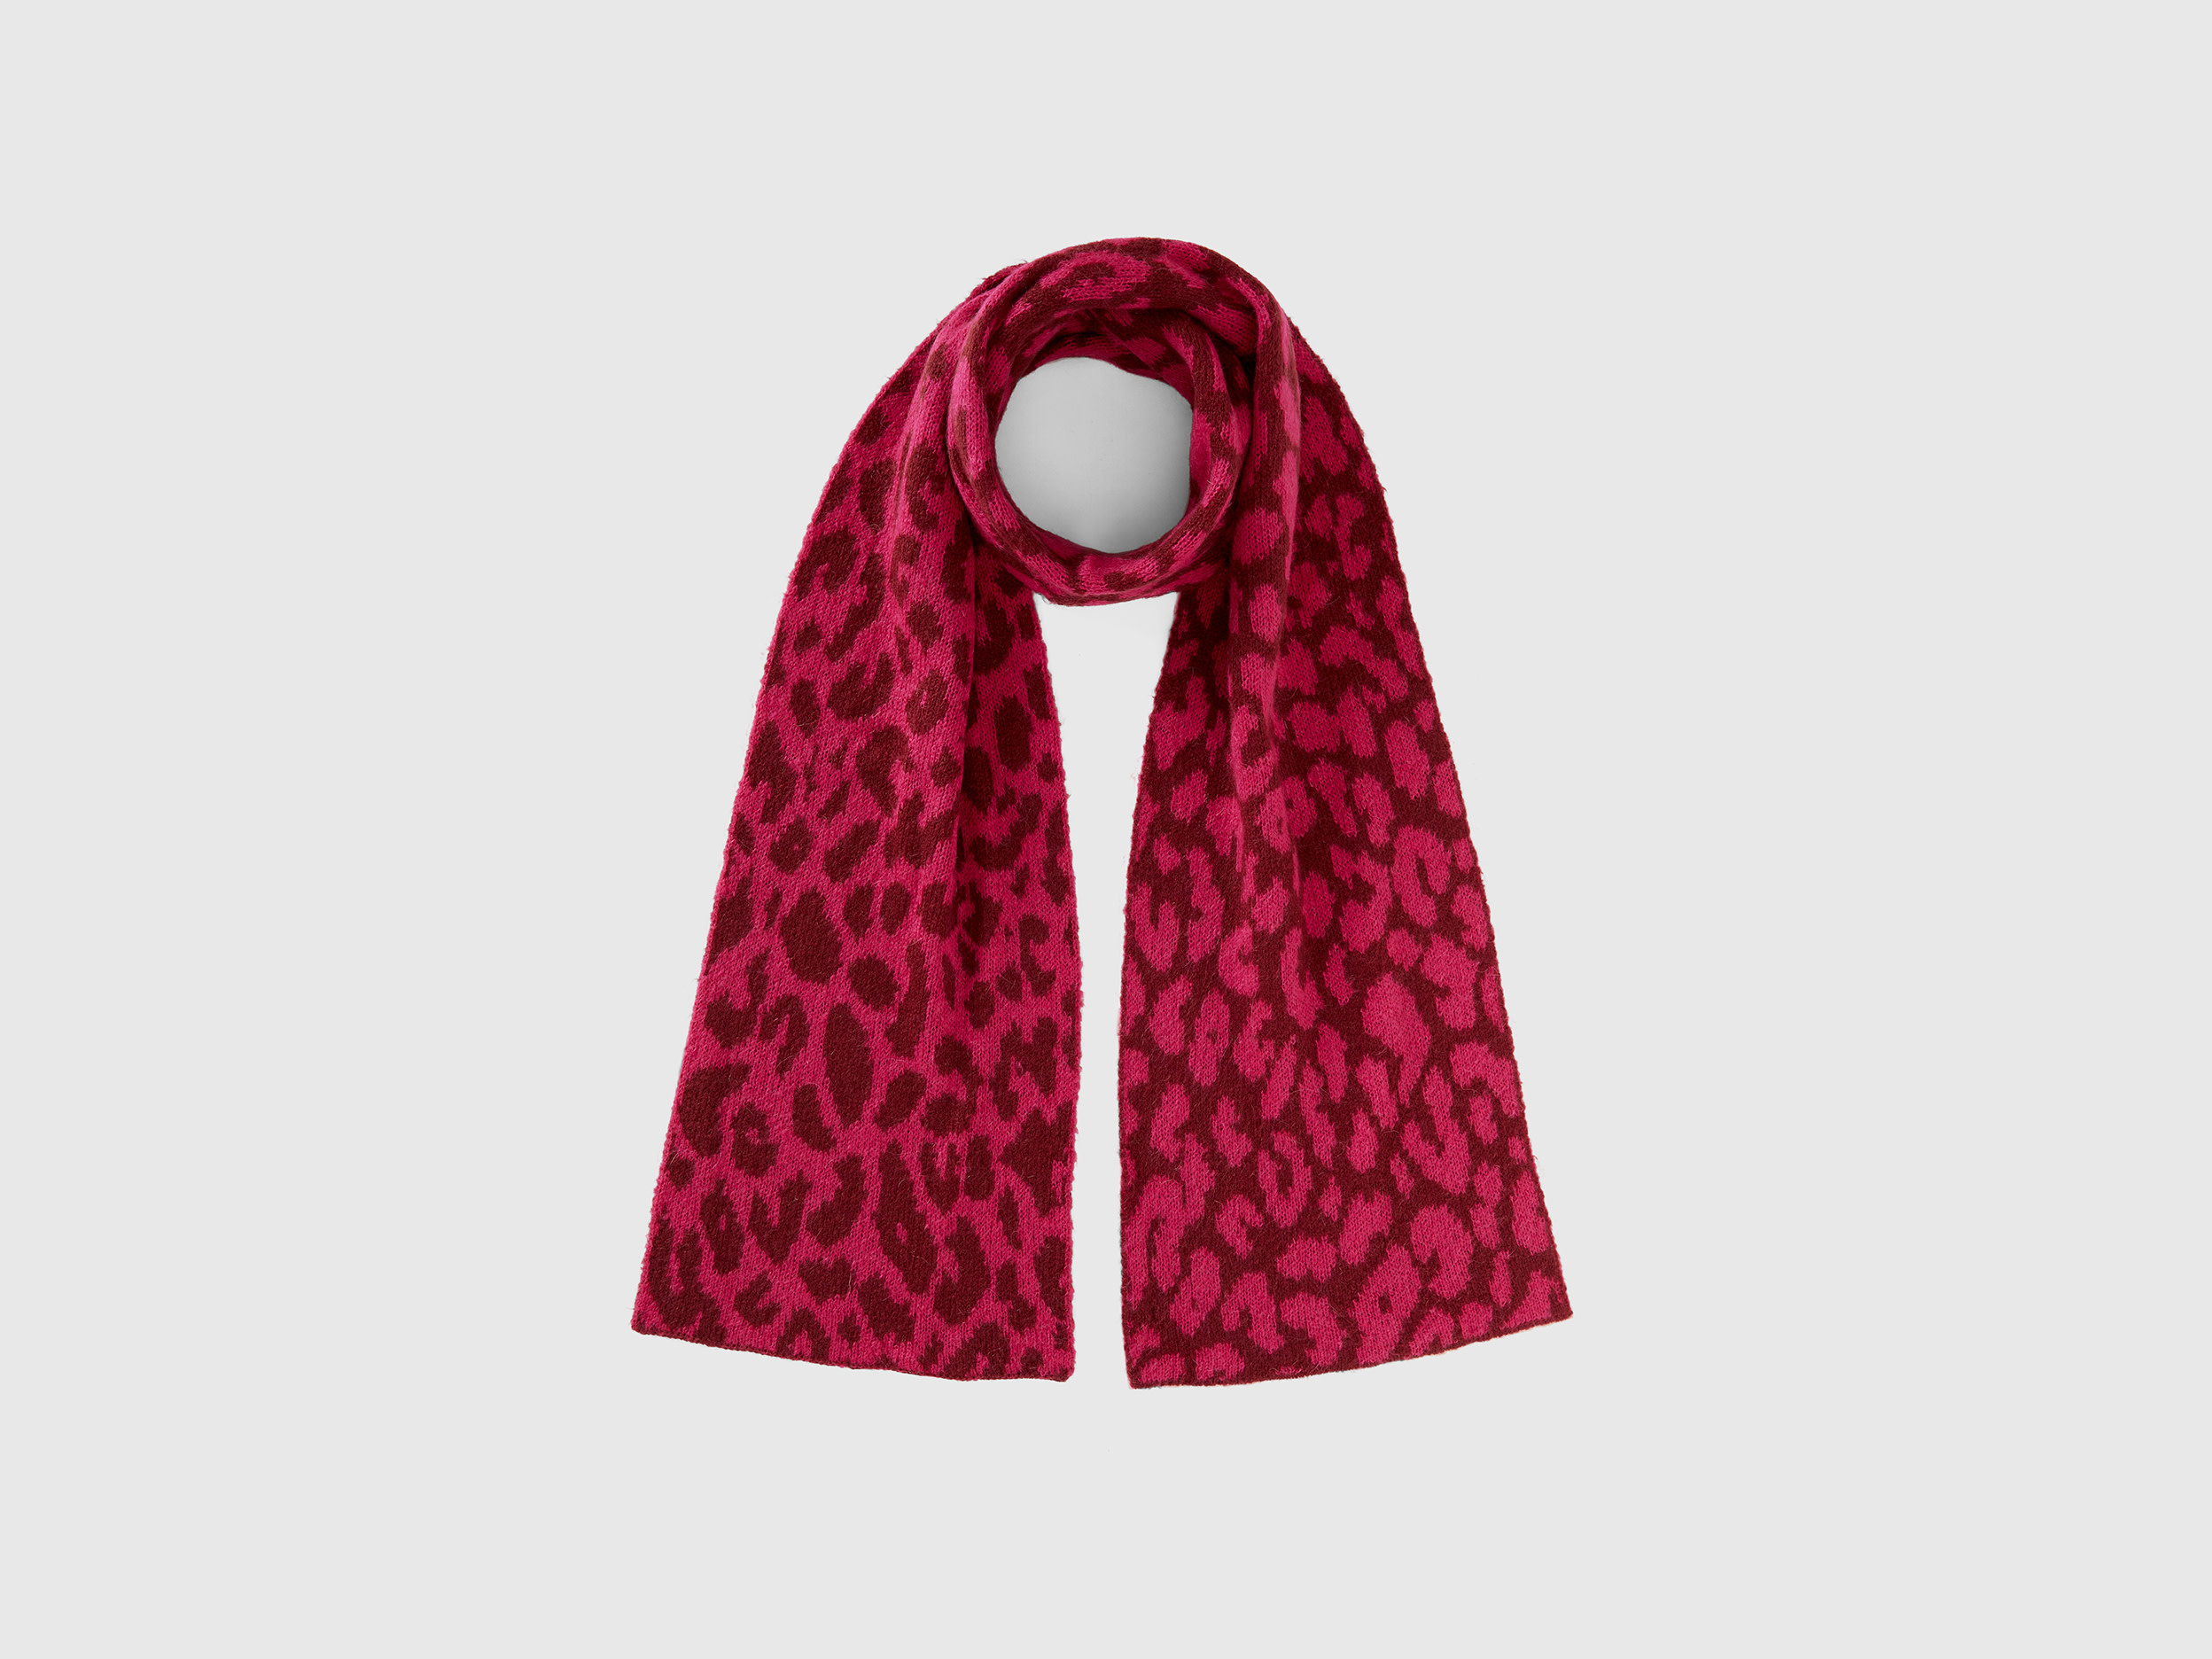 Benetton, Animal Print Scarf In Mohair Blend, size OS, Red, Women